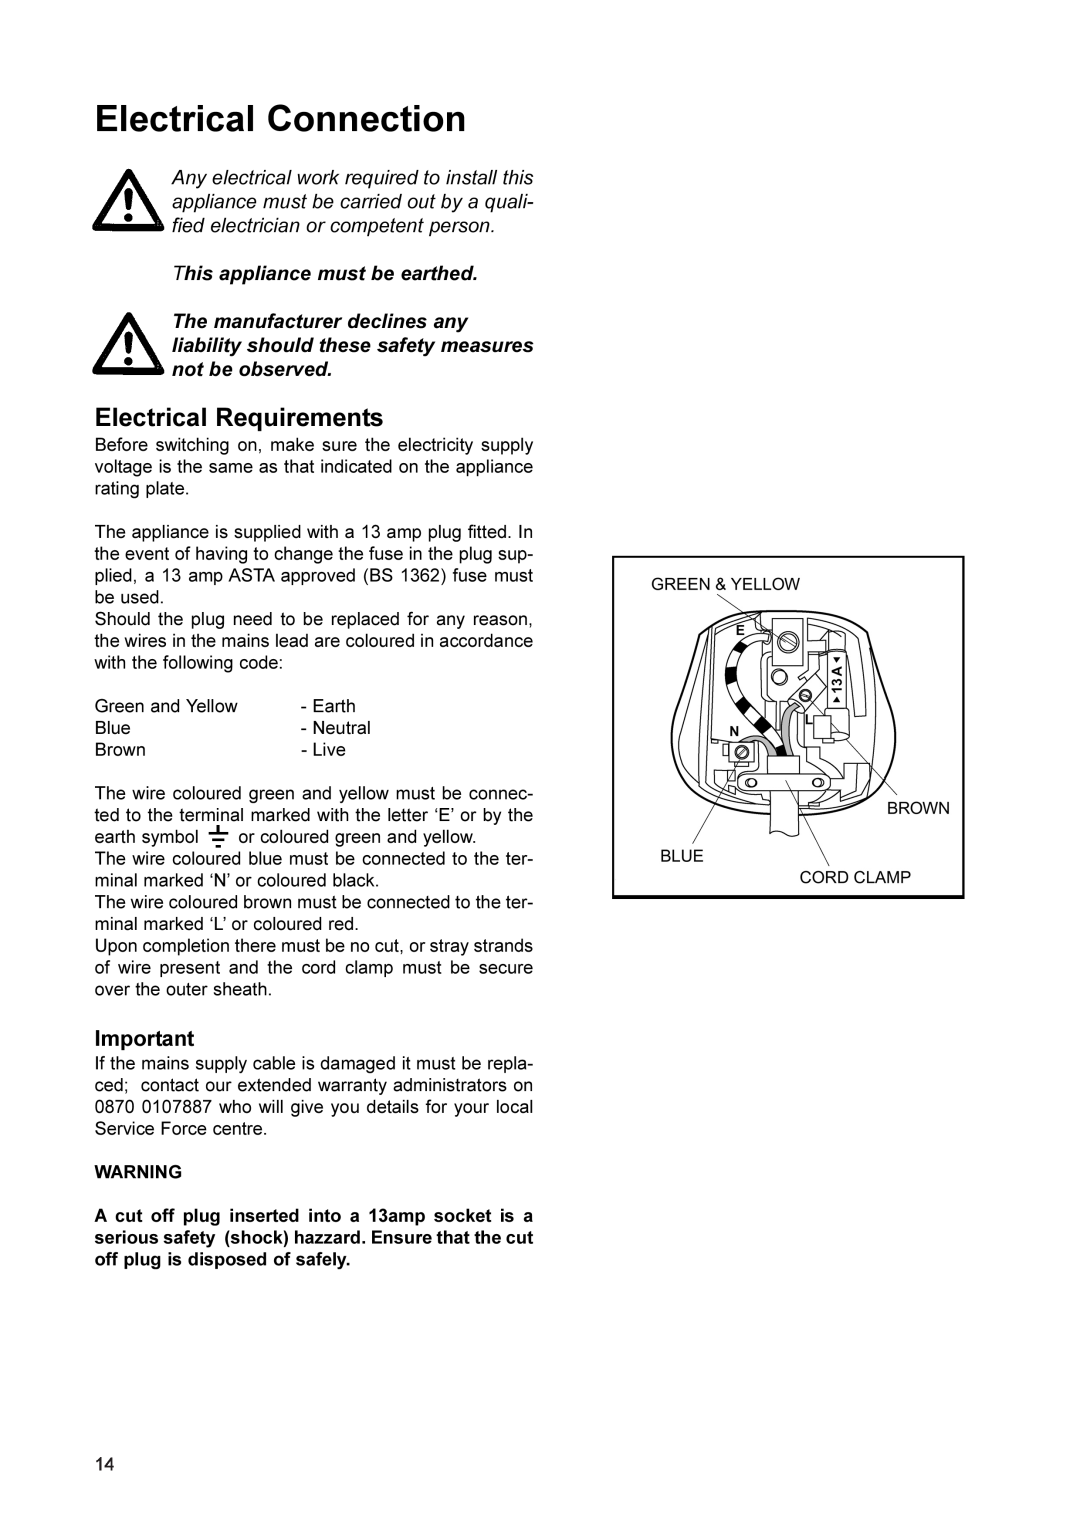 John Lewis JLFFW2001 manual Electrical Connection, Electrical Requirements 